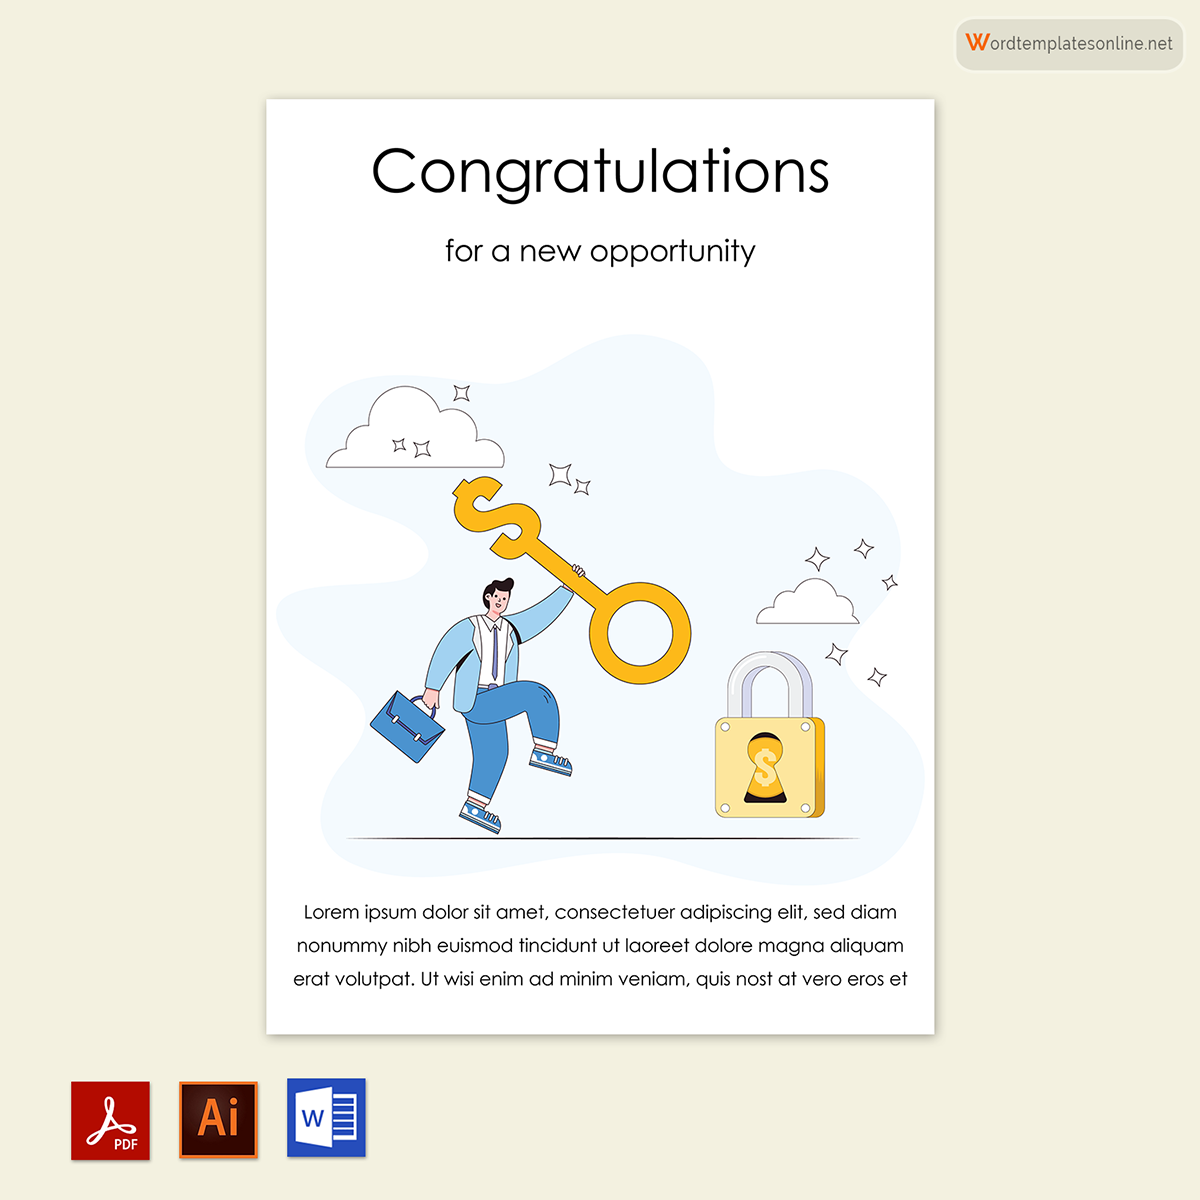 "Sample congratulations greeting card in Word"